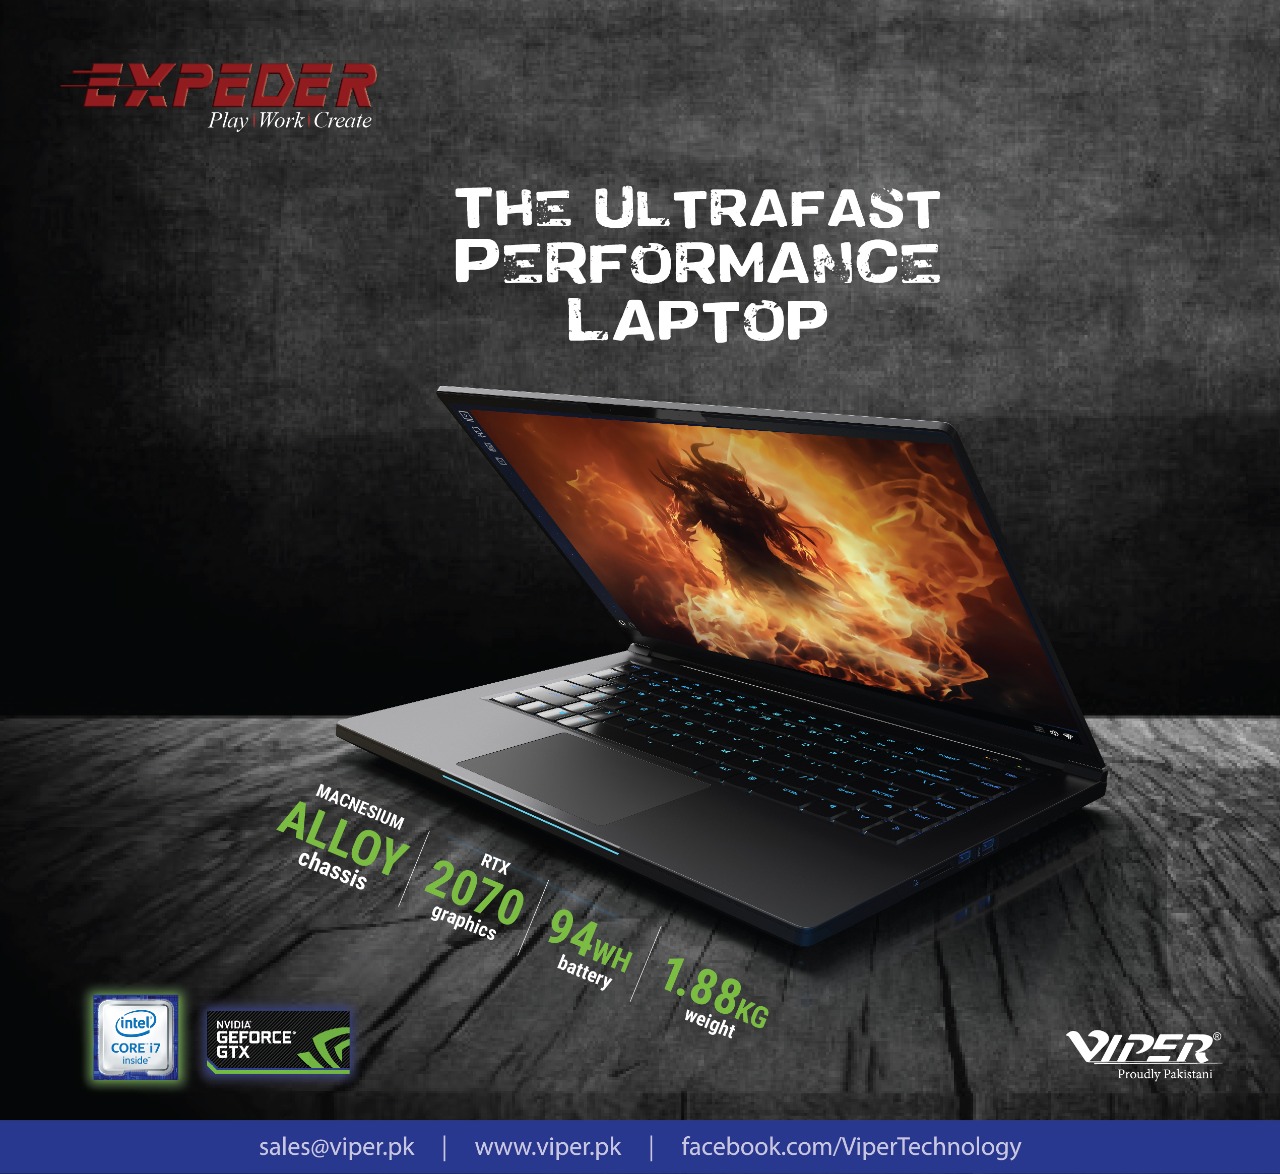 Viper Technology is The First Pakistani Company to Launch its Own Gaming Laptops